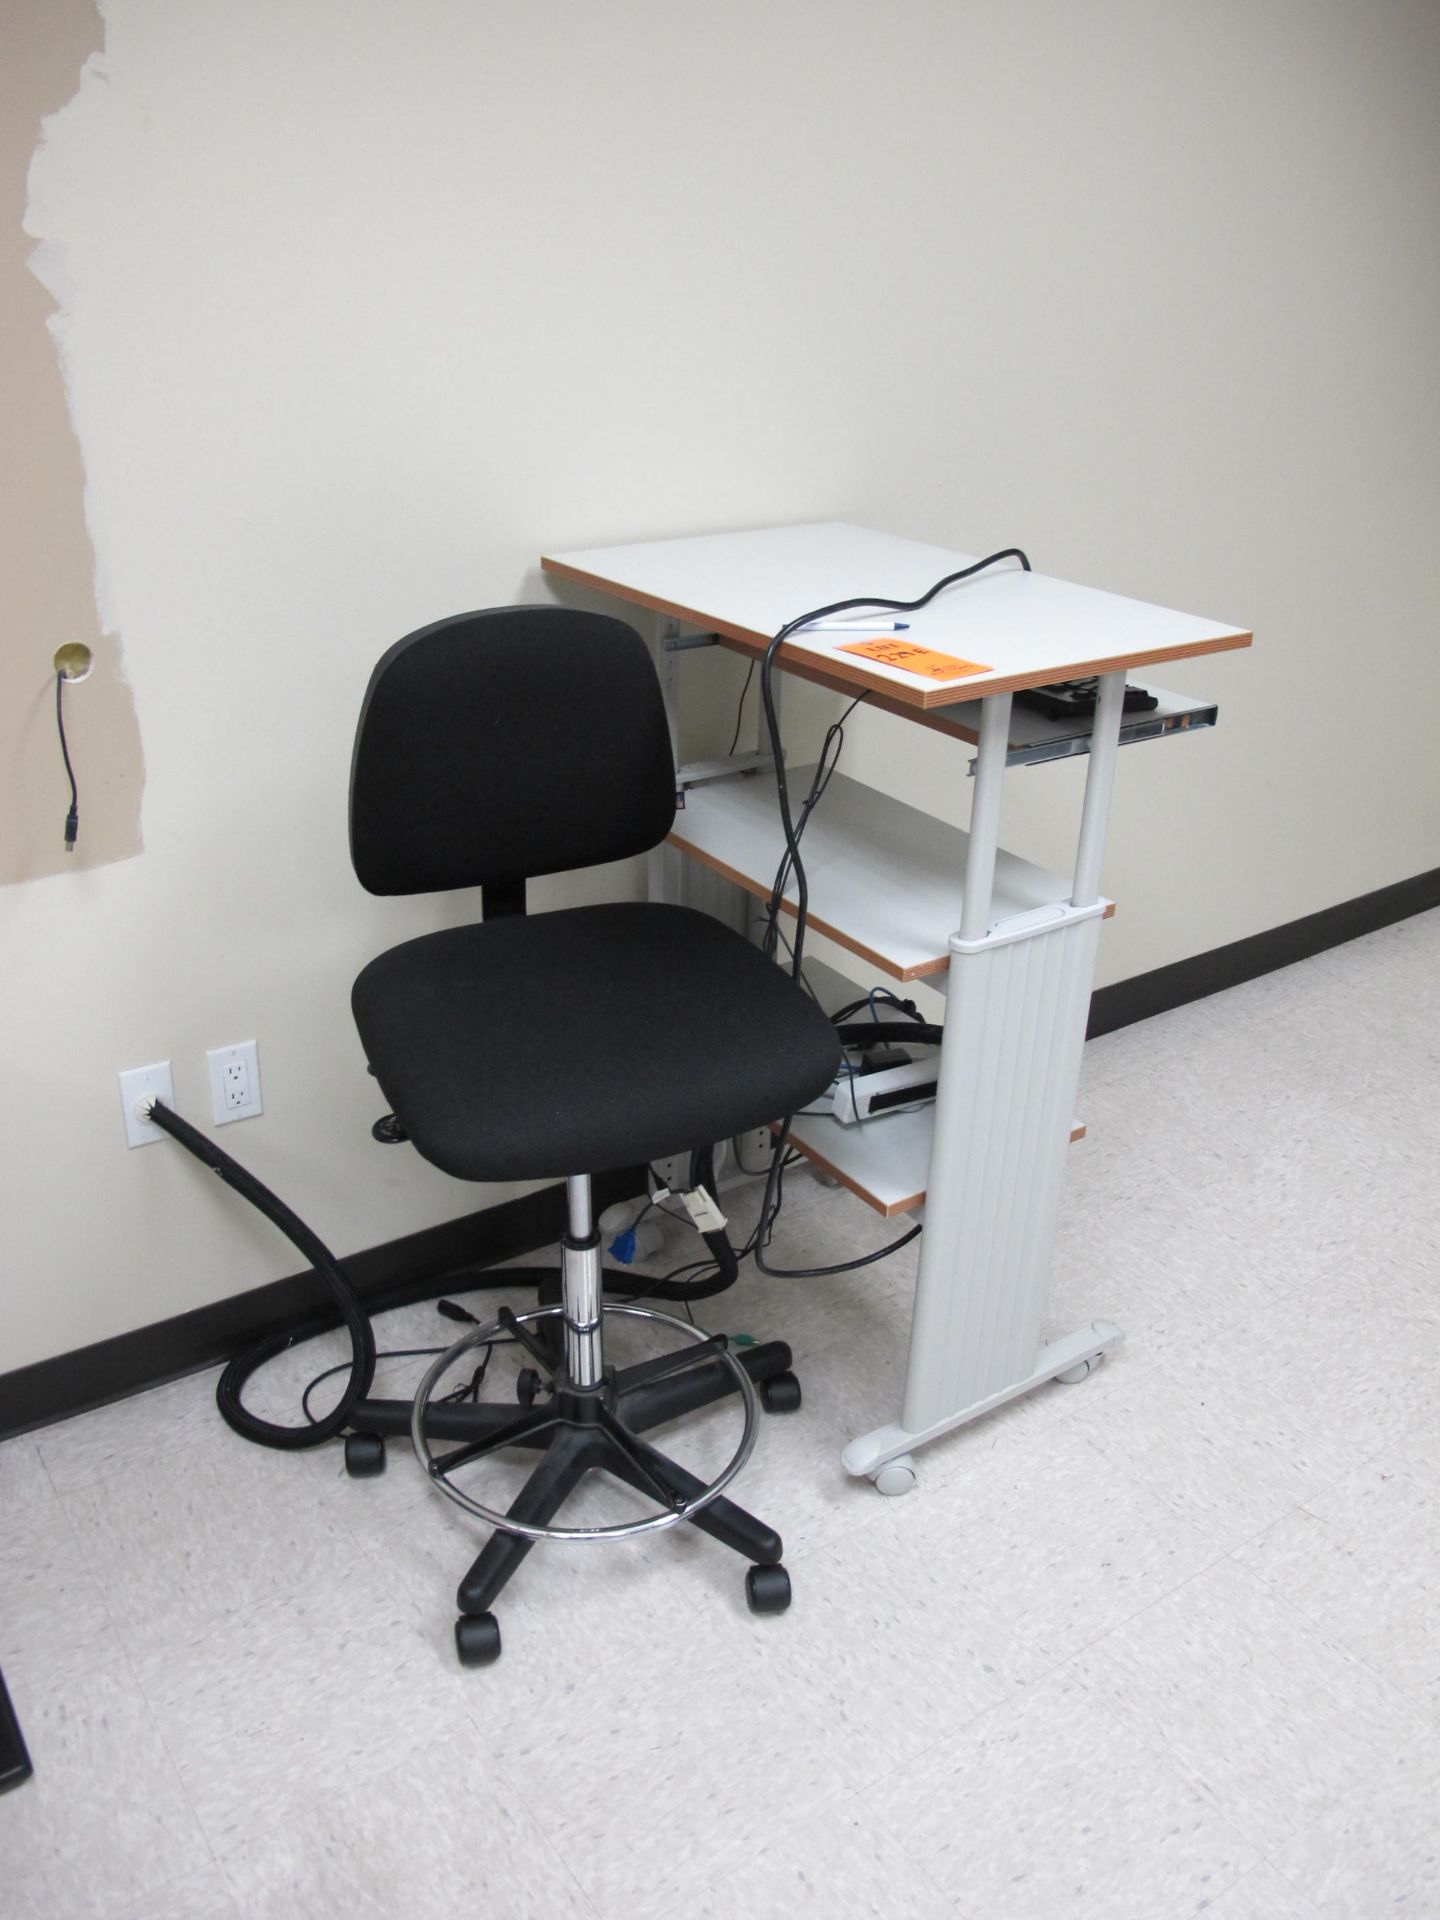 Teacher's Station including Desk with Organizers, Chair, Audio/Video Cabinet and Stool, 5-Shelf - Image 3 of 3